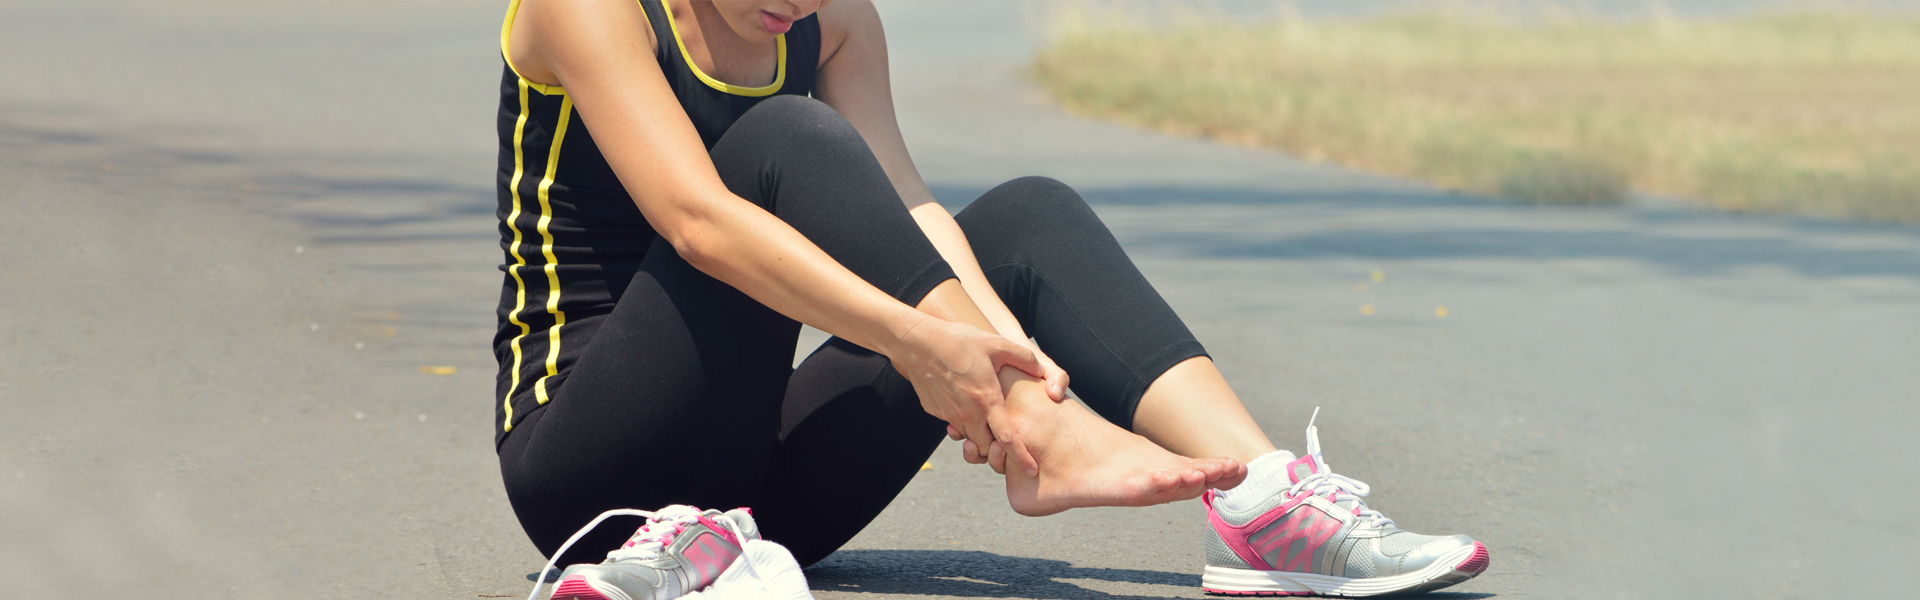 Ankle Sprain: Causes, Symptoms, Prevention, and Treatment